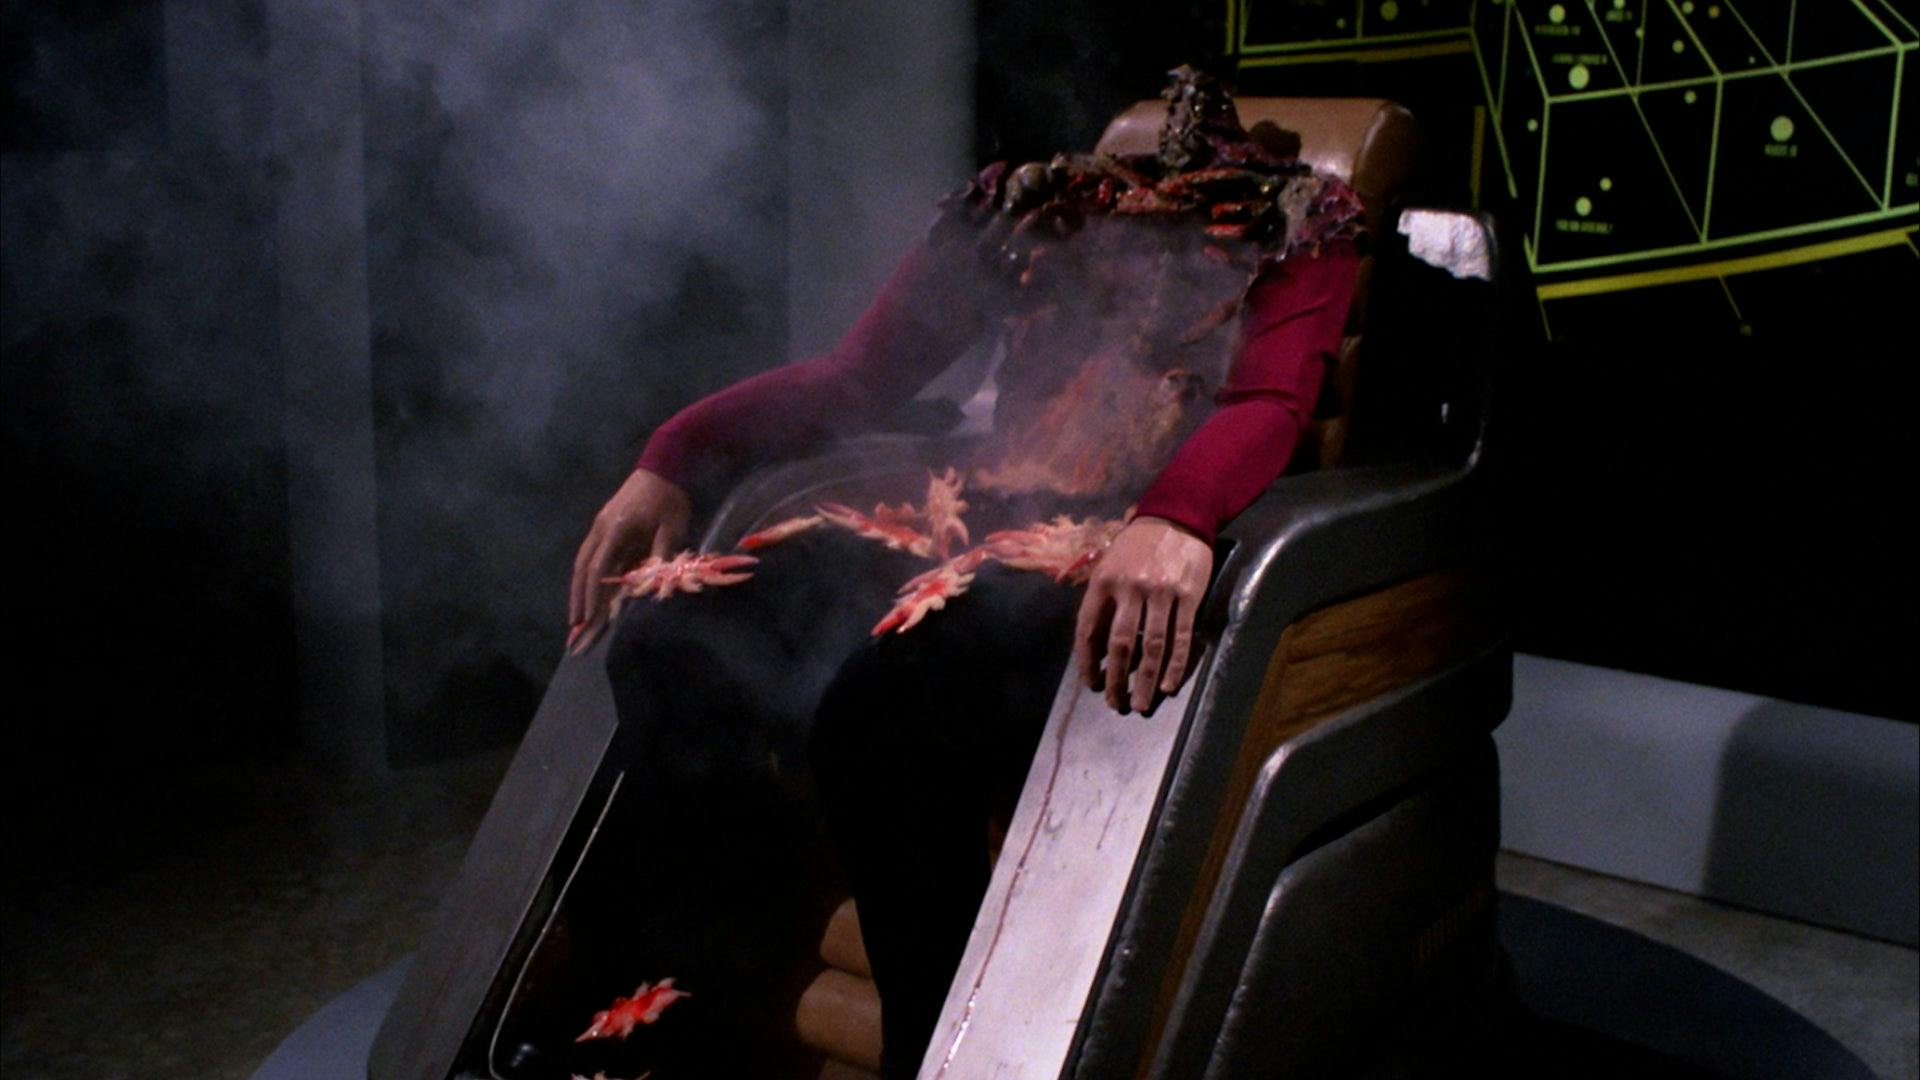 A headless Starfleet captain sits in a chair, with their skeleton partially exposed.